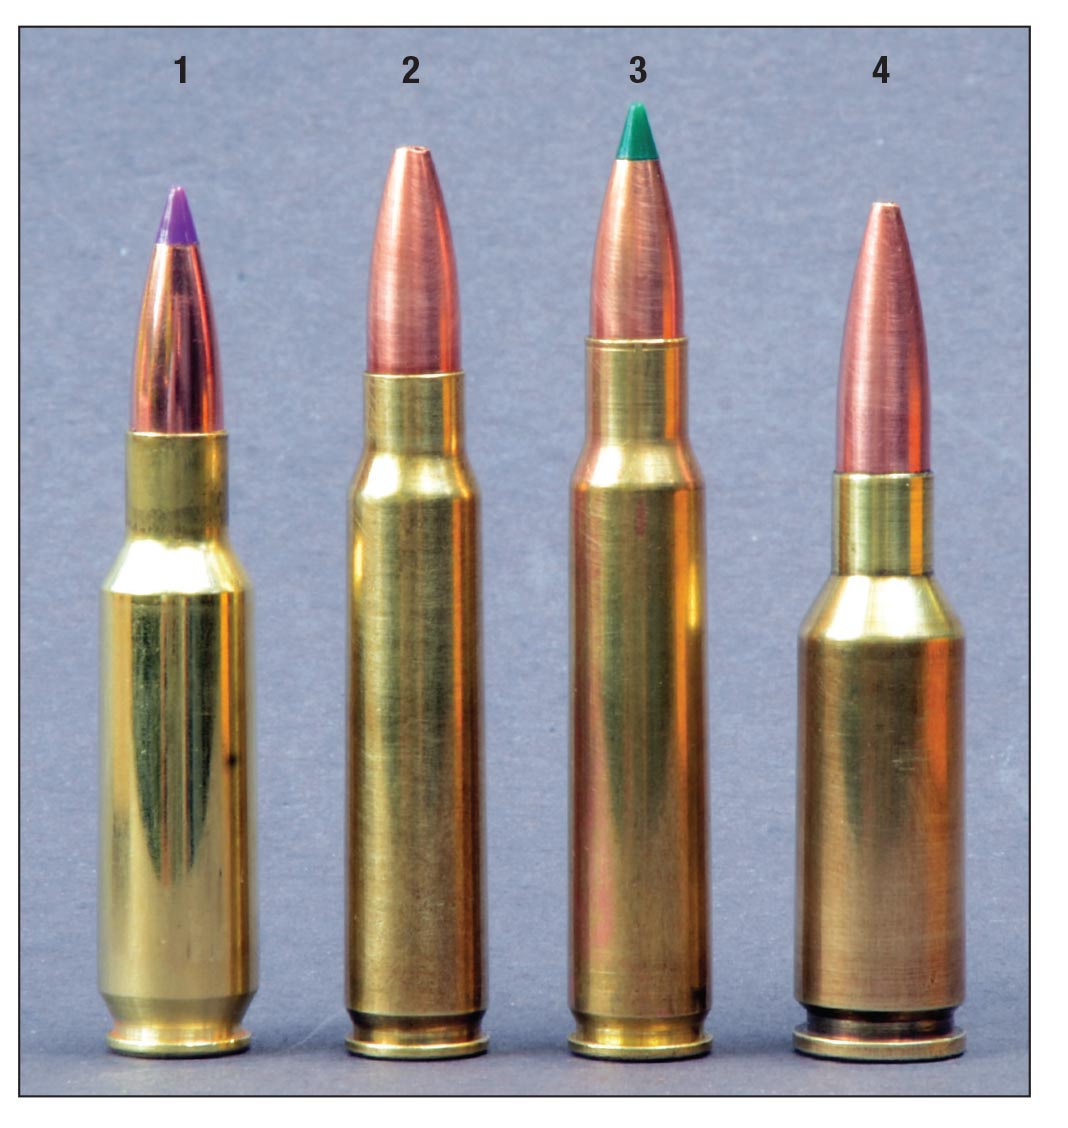 The .24 Nosler is shown here with other 6mm cartridges comparable in performance: (1) .24 Nosler, (2) 6x45mm (.223 Remington case), (3) 6x47mm (.222 Remington Magnum case) and the (4) 6mm PPC.